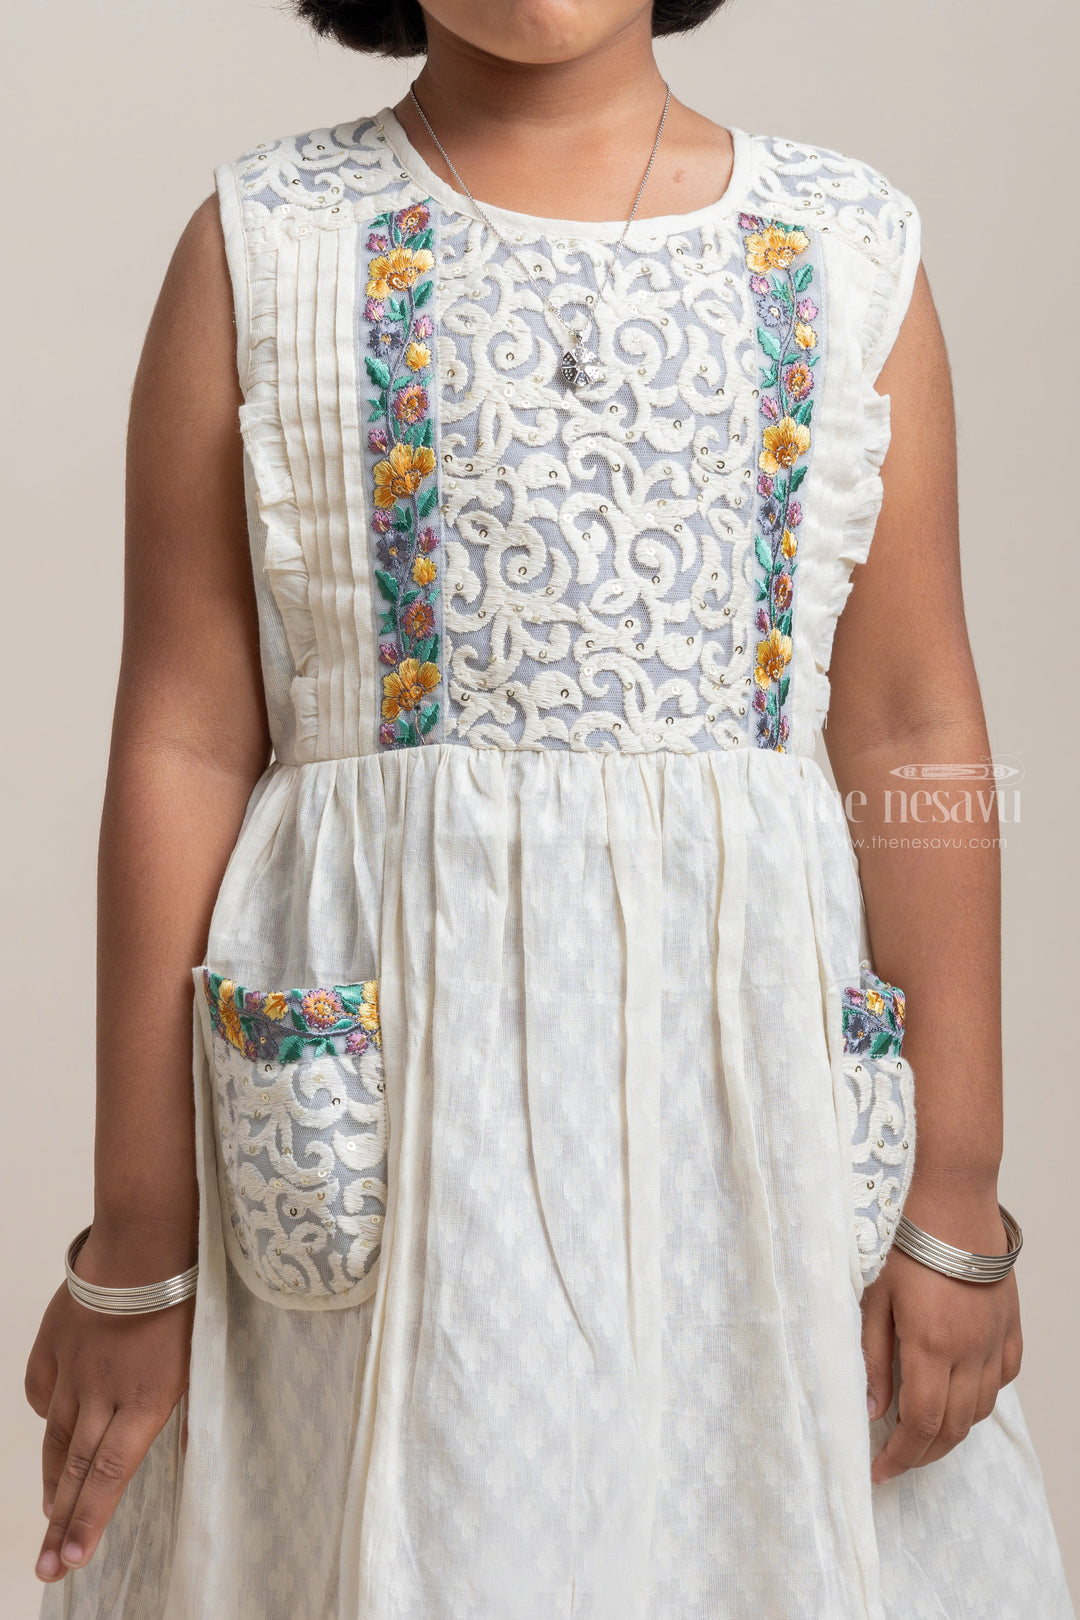 The Nesavu Girls Cotton Frock Beautiful Half White Self Butti Floral Embroidery Designer Casual Frock For Girls Nesavu Fantastic Collection For Girls | Cotton Wear For Girls | The Nesavu